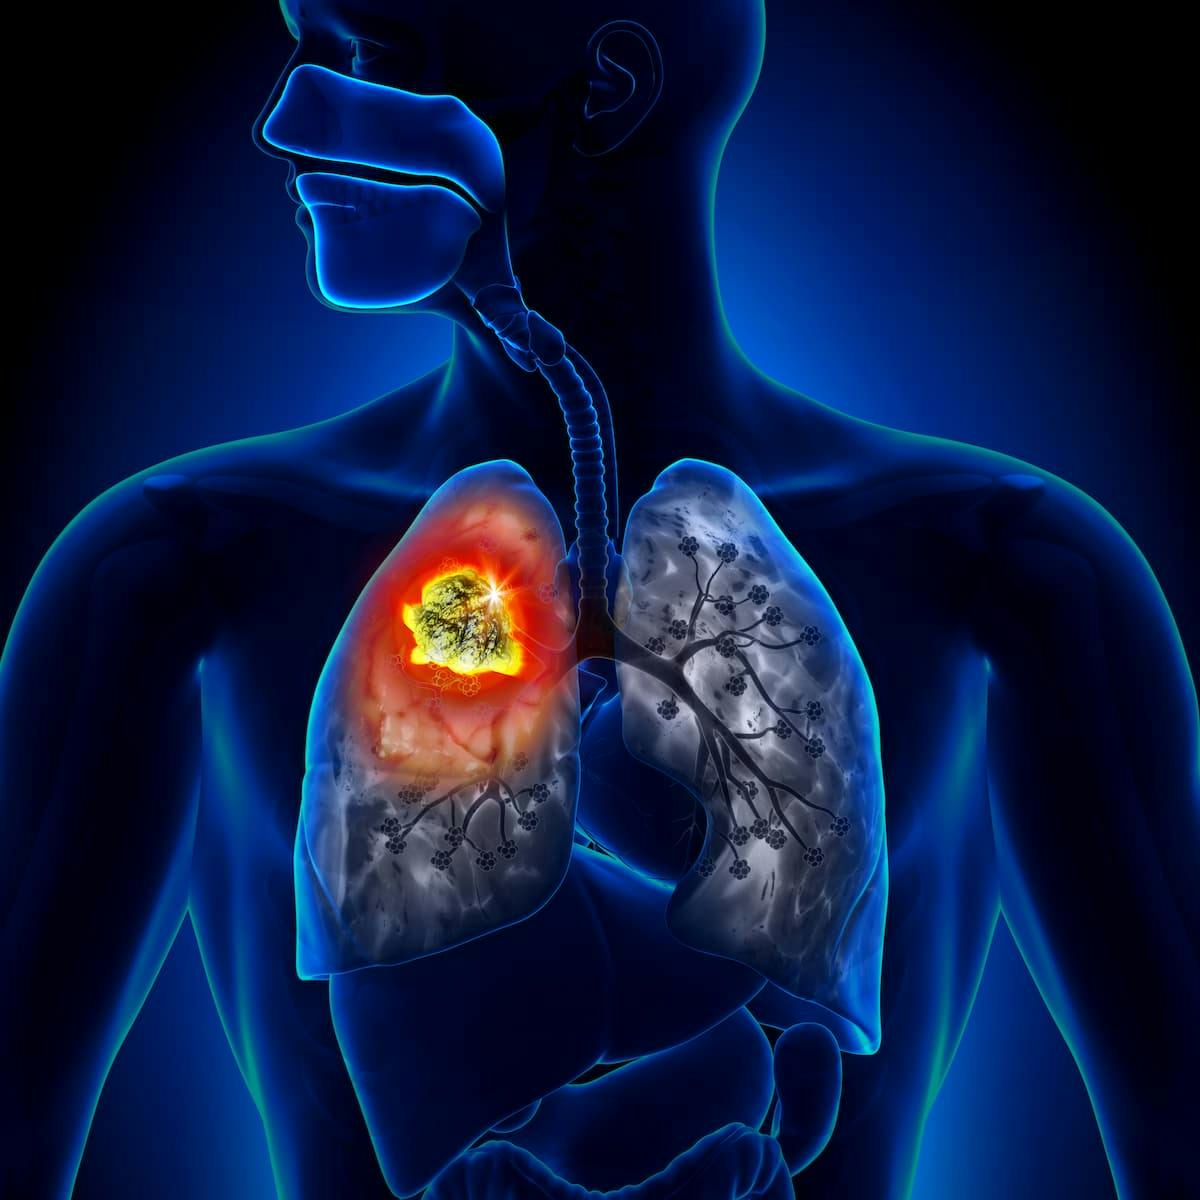 Results from the phase 3 LAURA trial found a statistically significant PFS benefit and a positive trend in OS with osimertinib following chemoradiotherapy in patients with stage III EGFR-mutated non–small cell lung cancer.